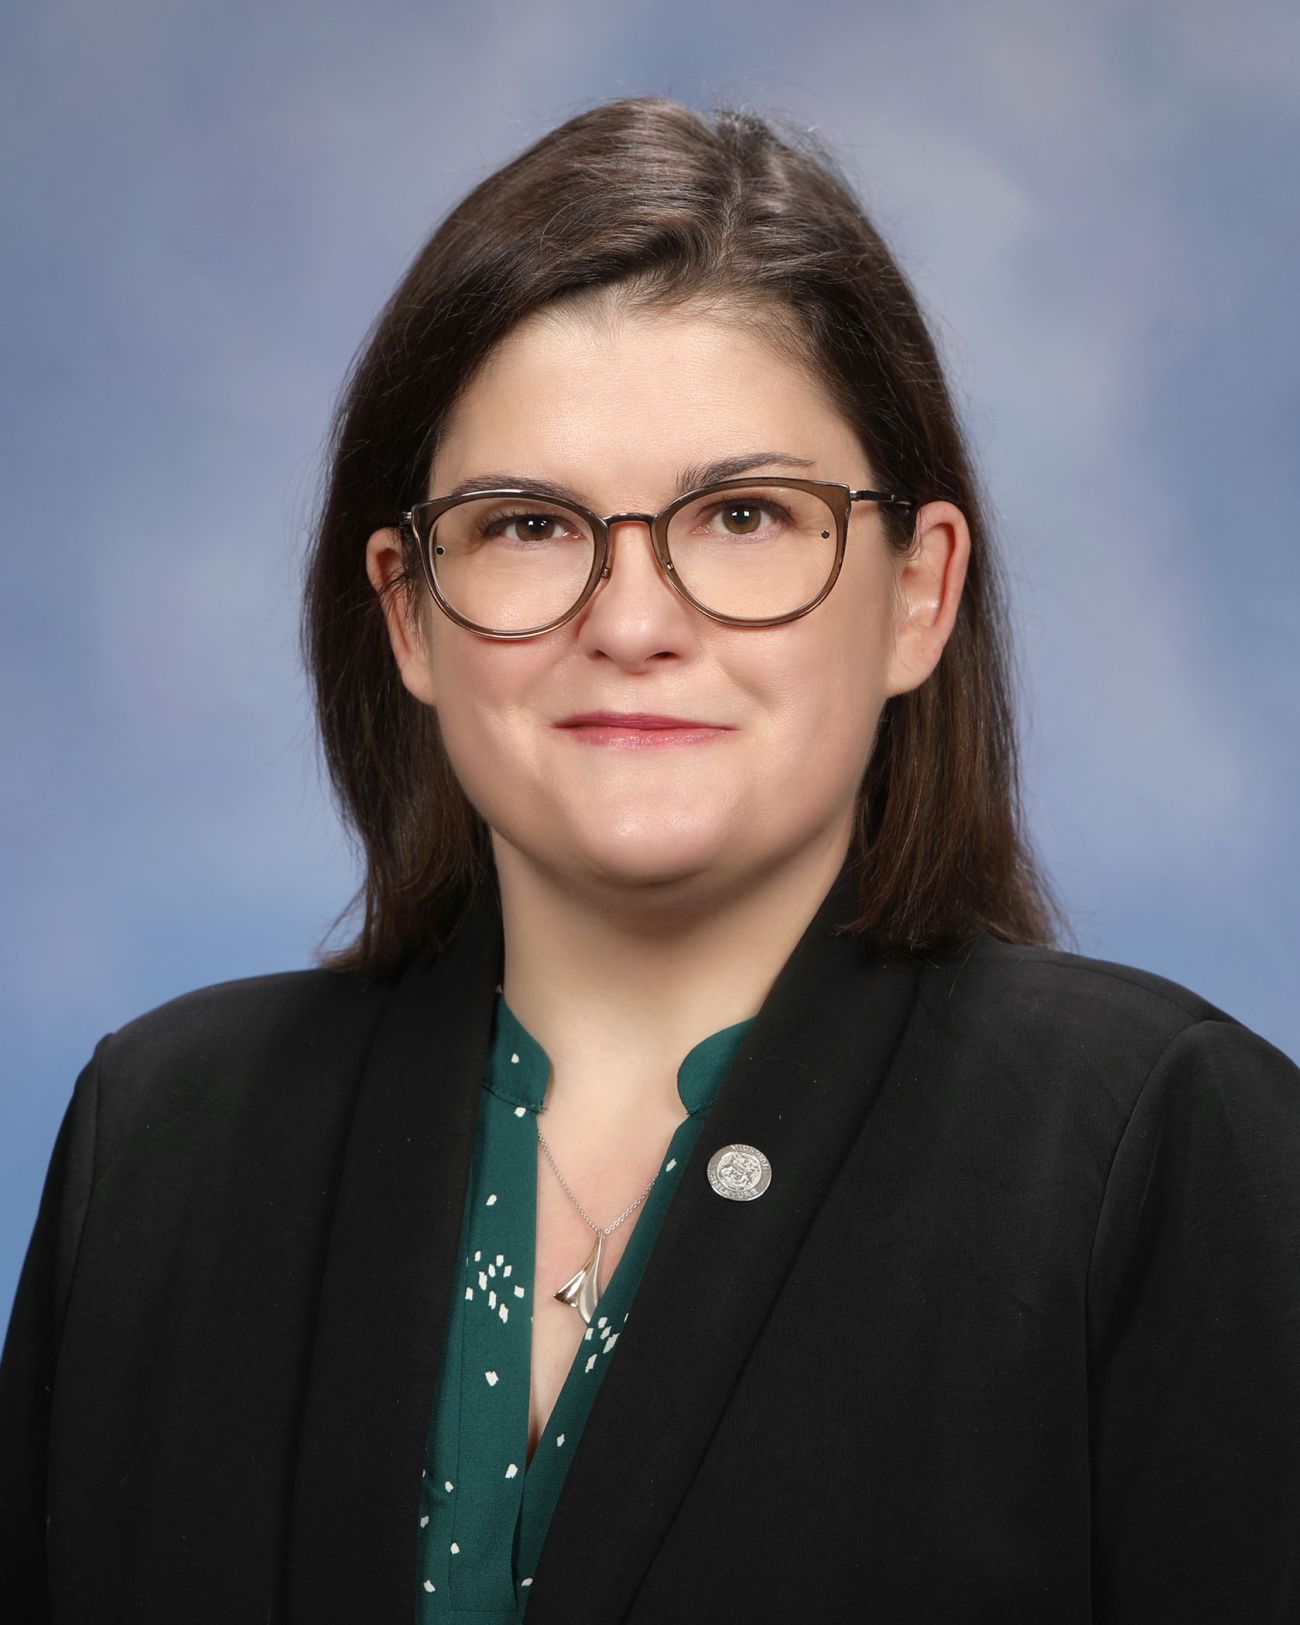 State Rep. Kara Hope, D-Holt, represents Michigan’s 74th House district.